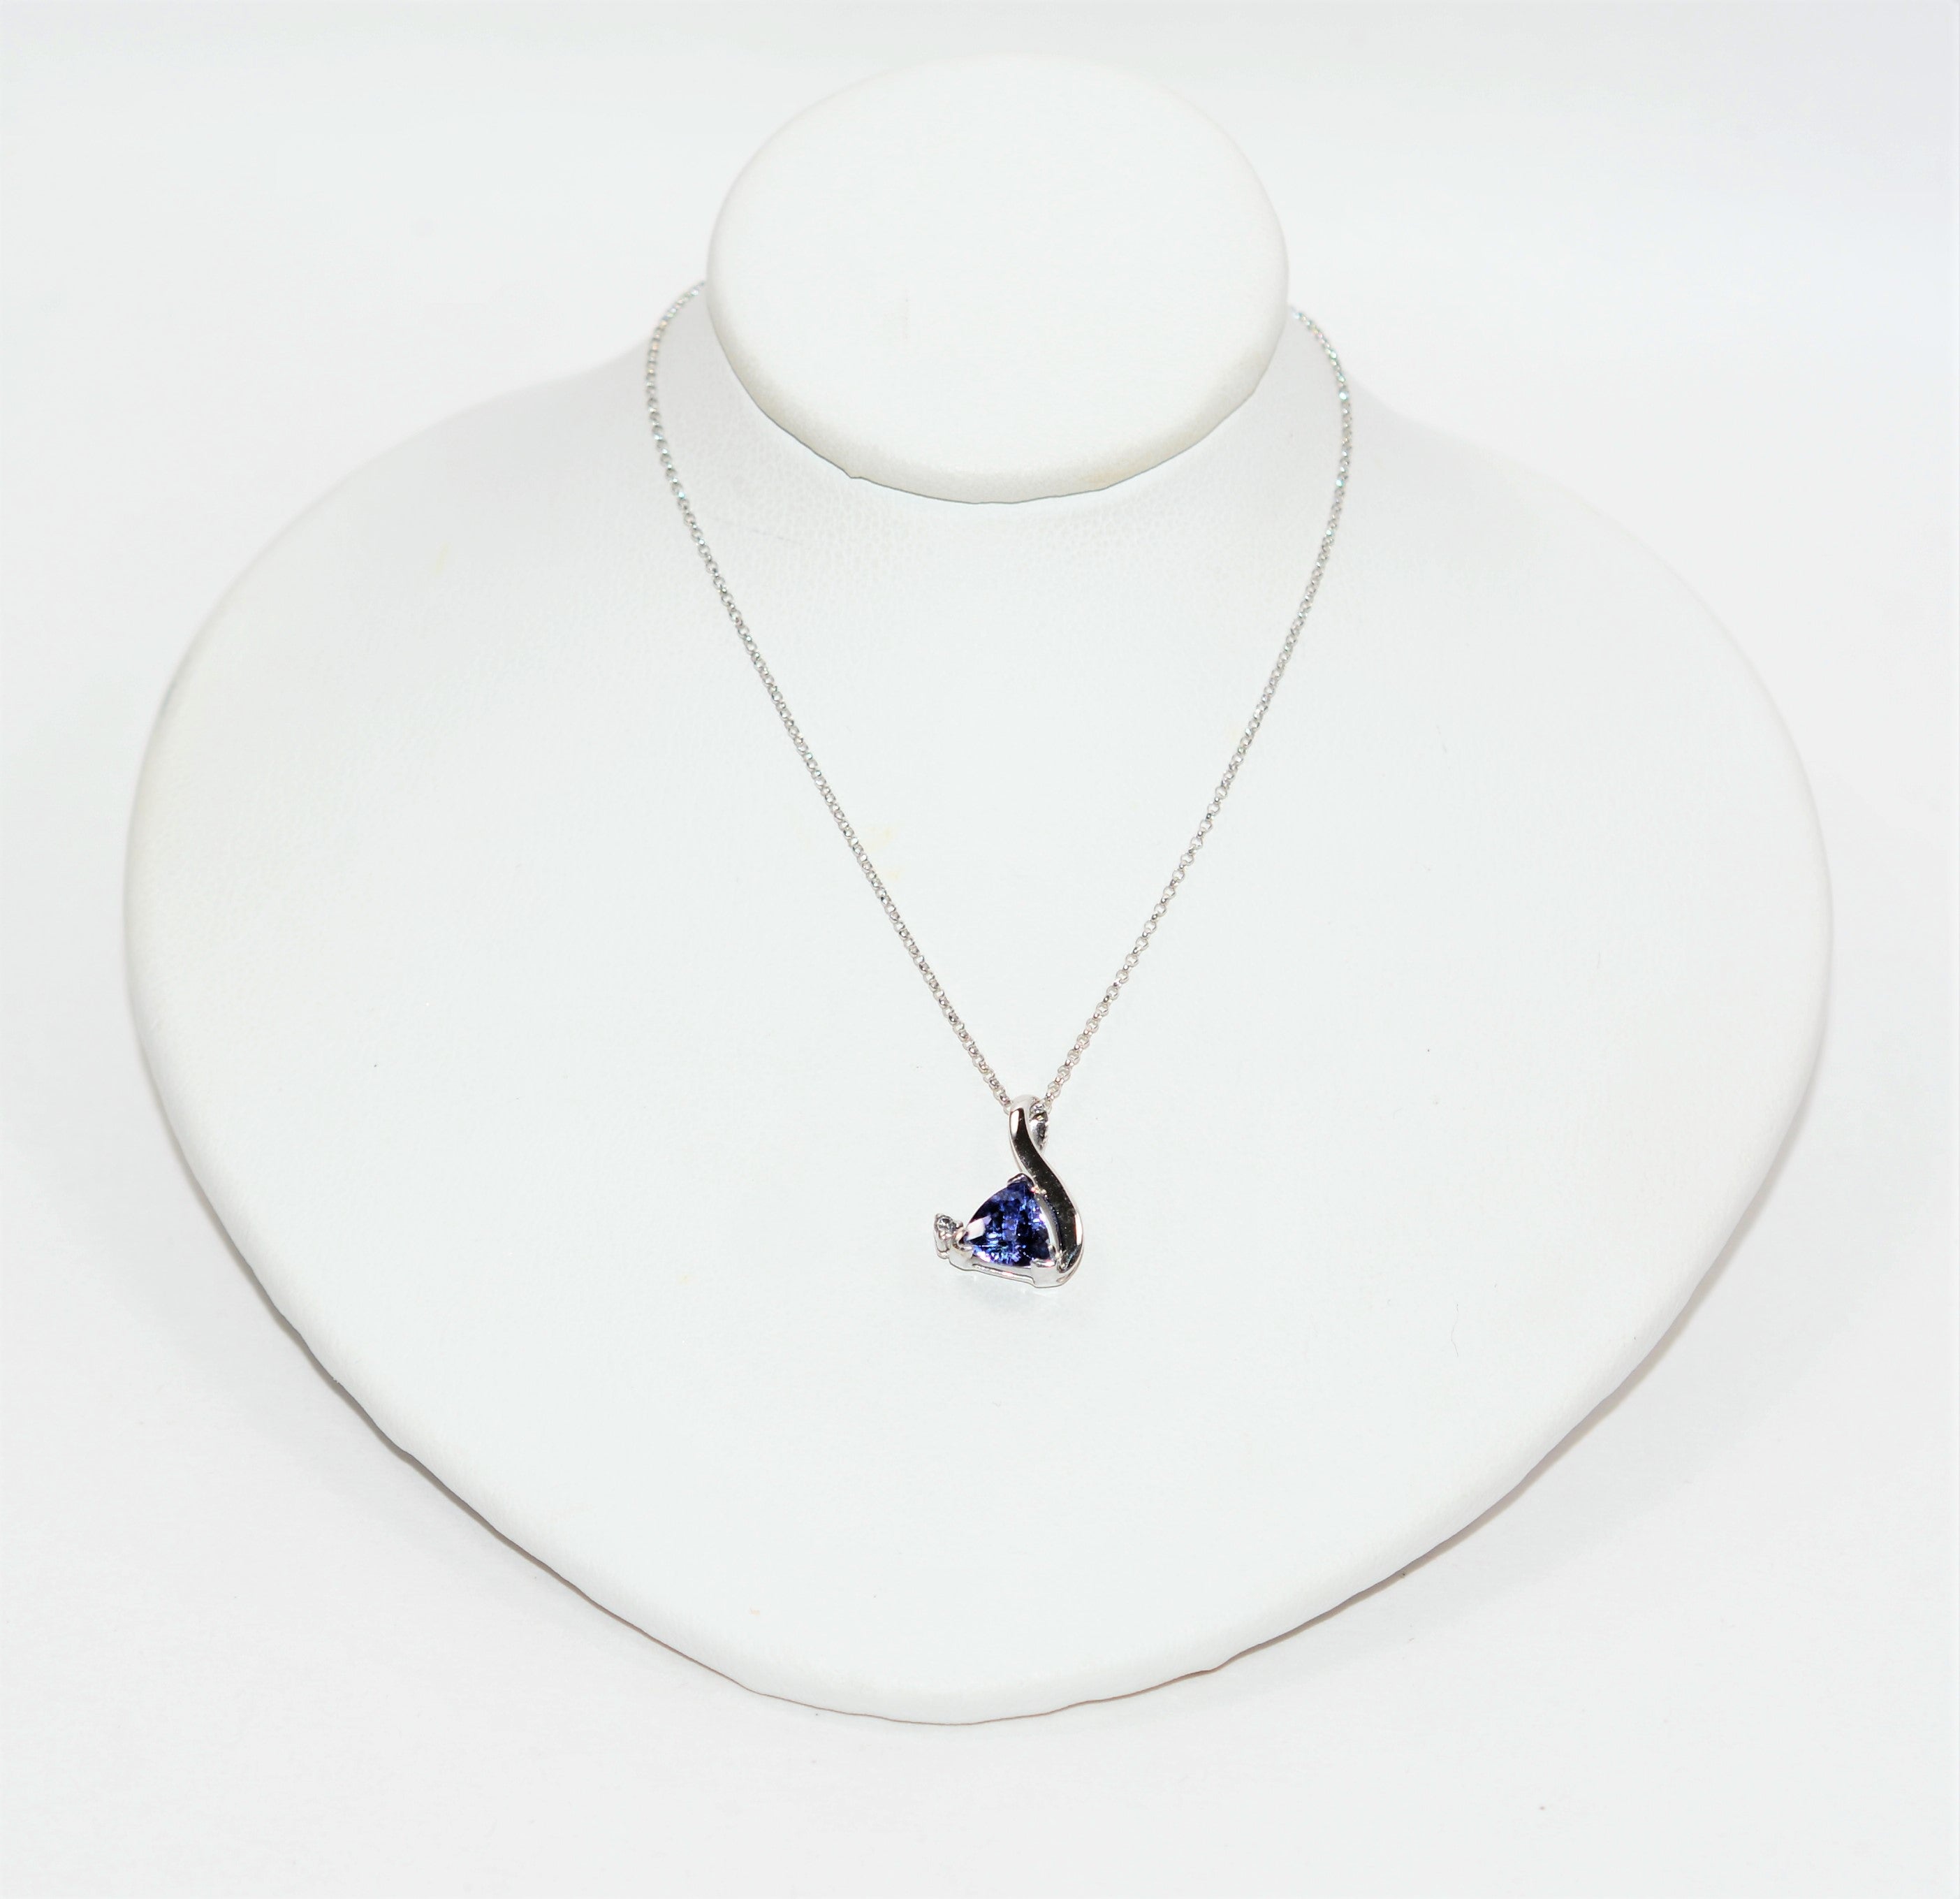 Natural Tanzanite & Diamond Necklace 14K Solid White Gold .91tcw Gemstone Necklace Cocktail Necklace Purple Necklace Birthstone Necklace